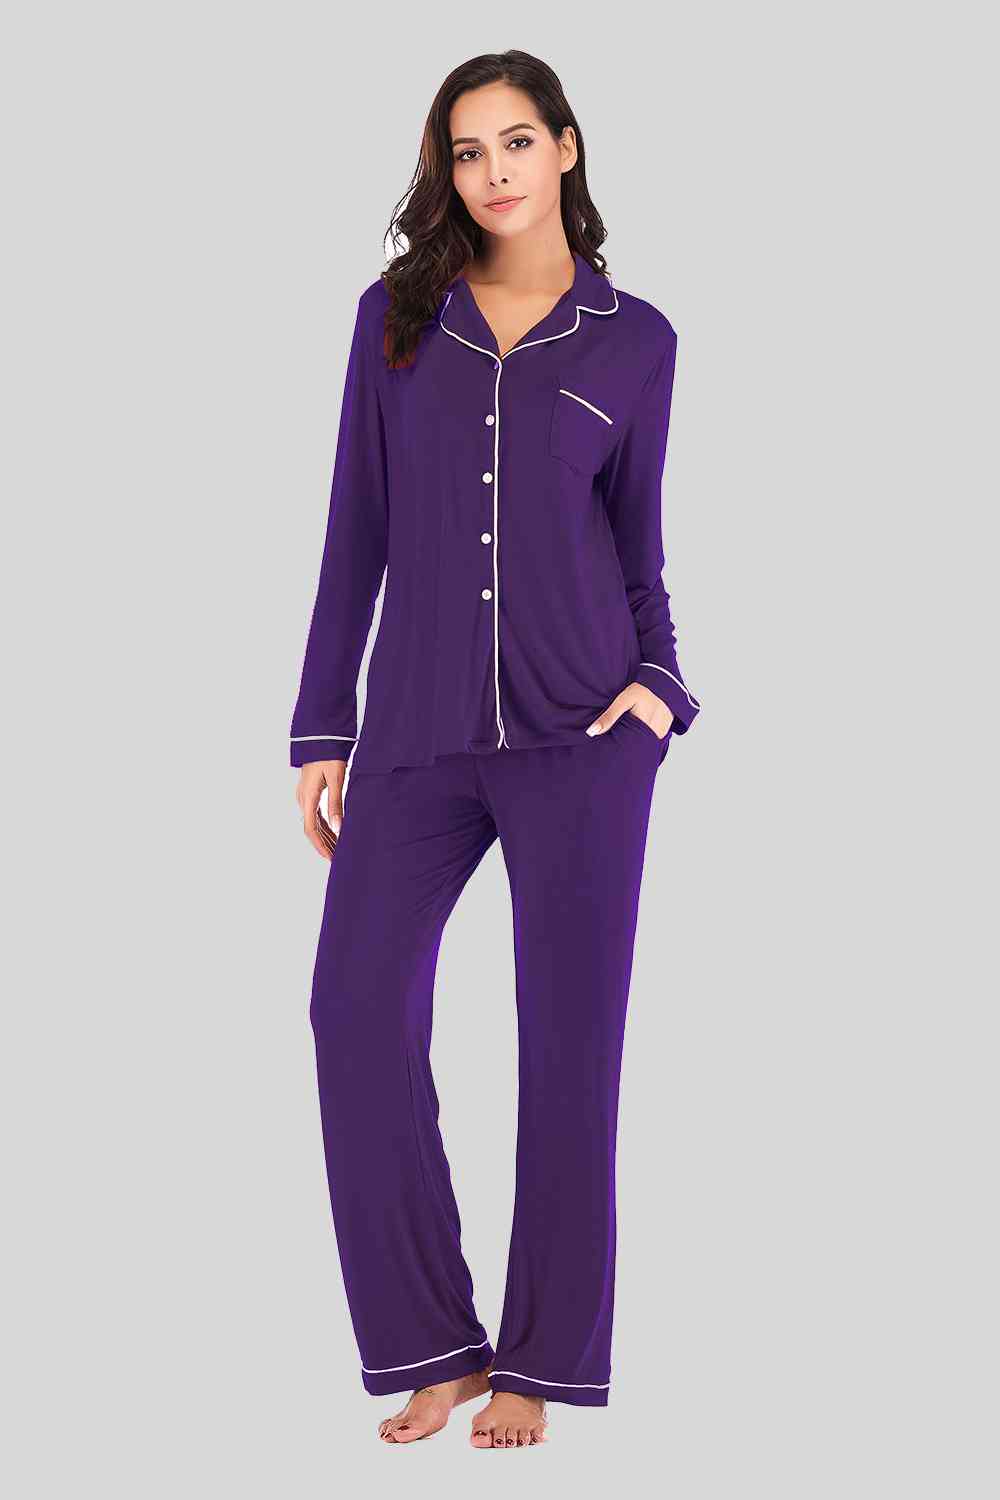 Collared Neck Long Sleeve Loungewear Set with Pockets Violet